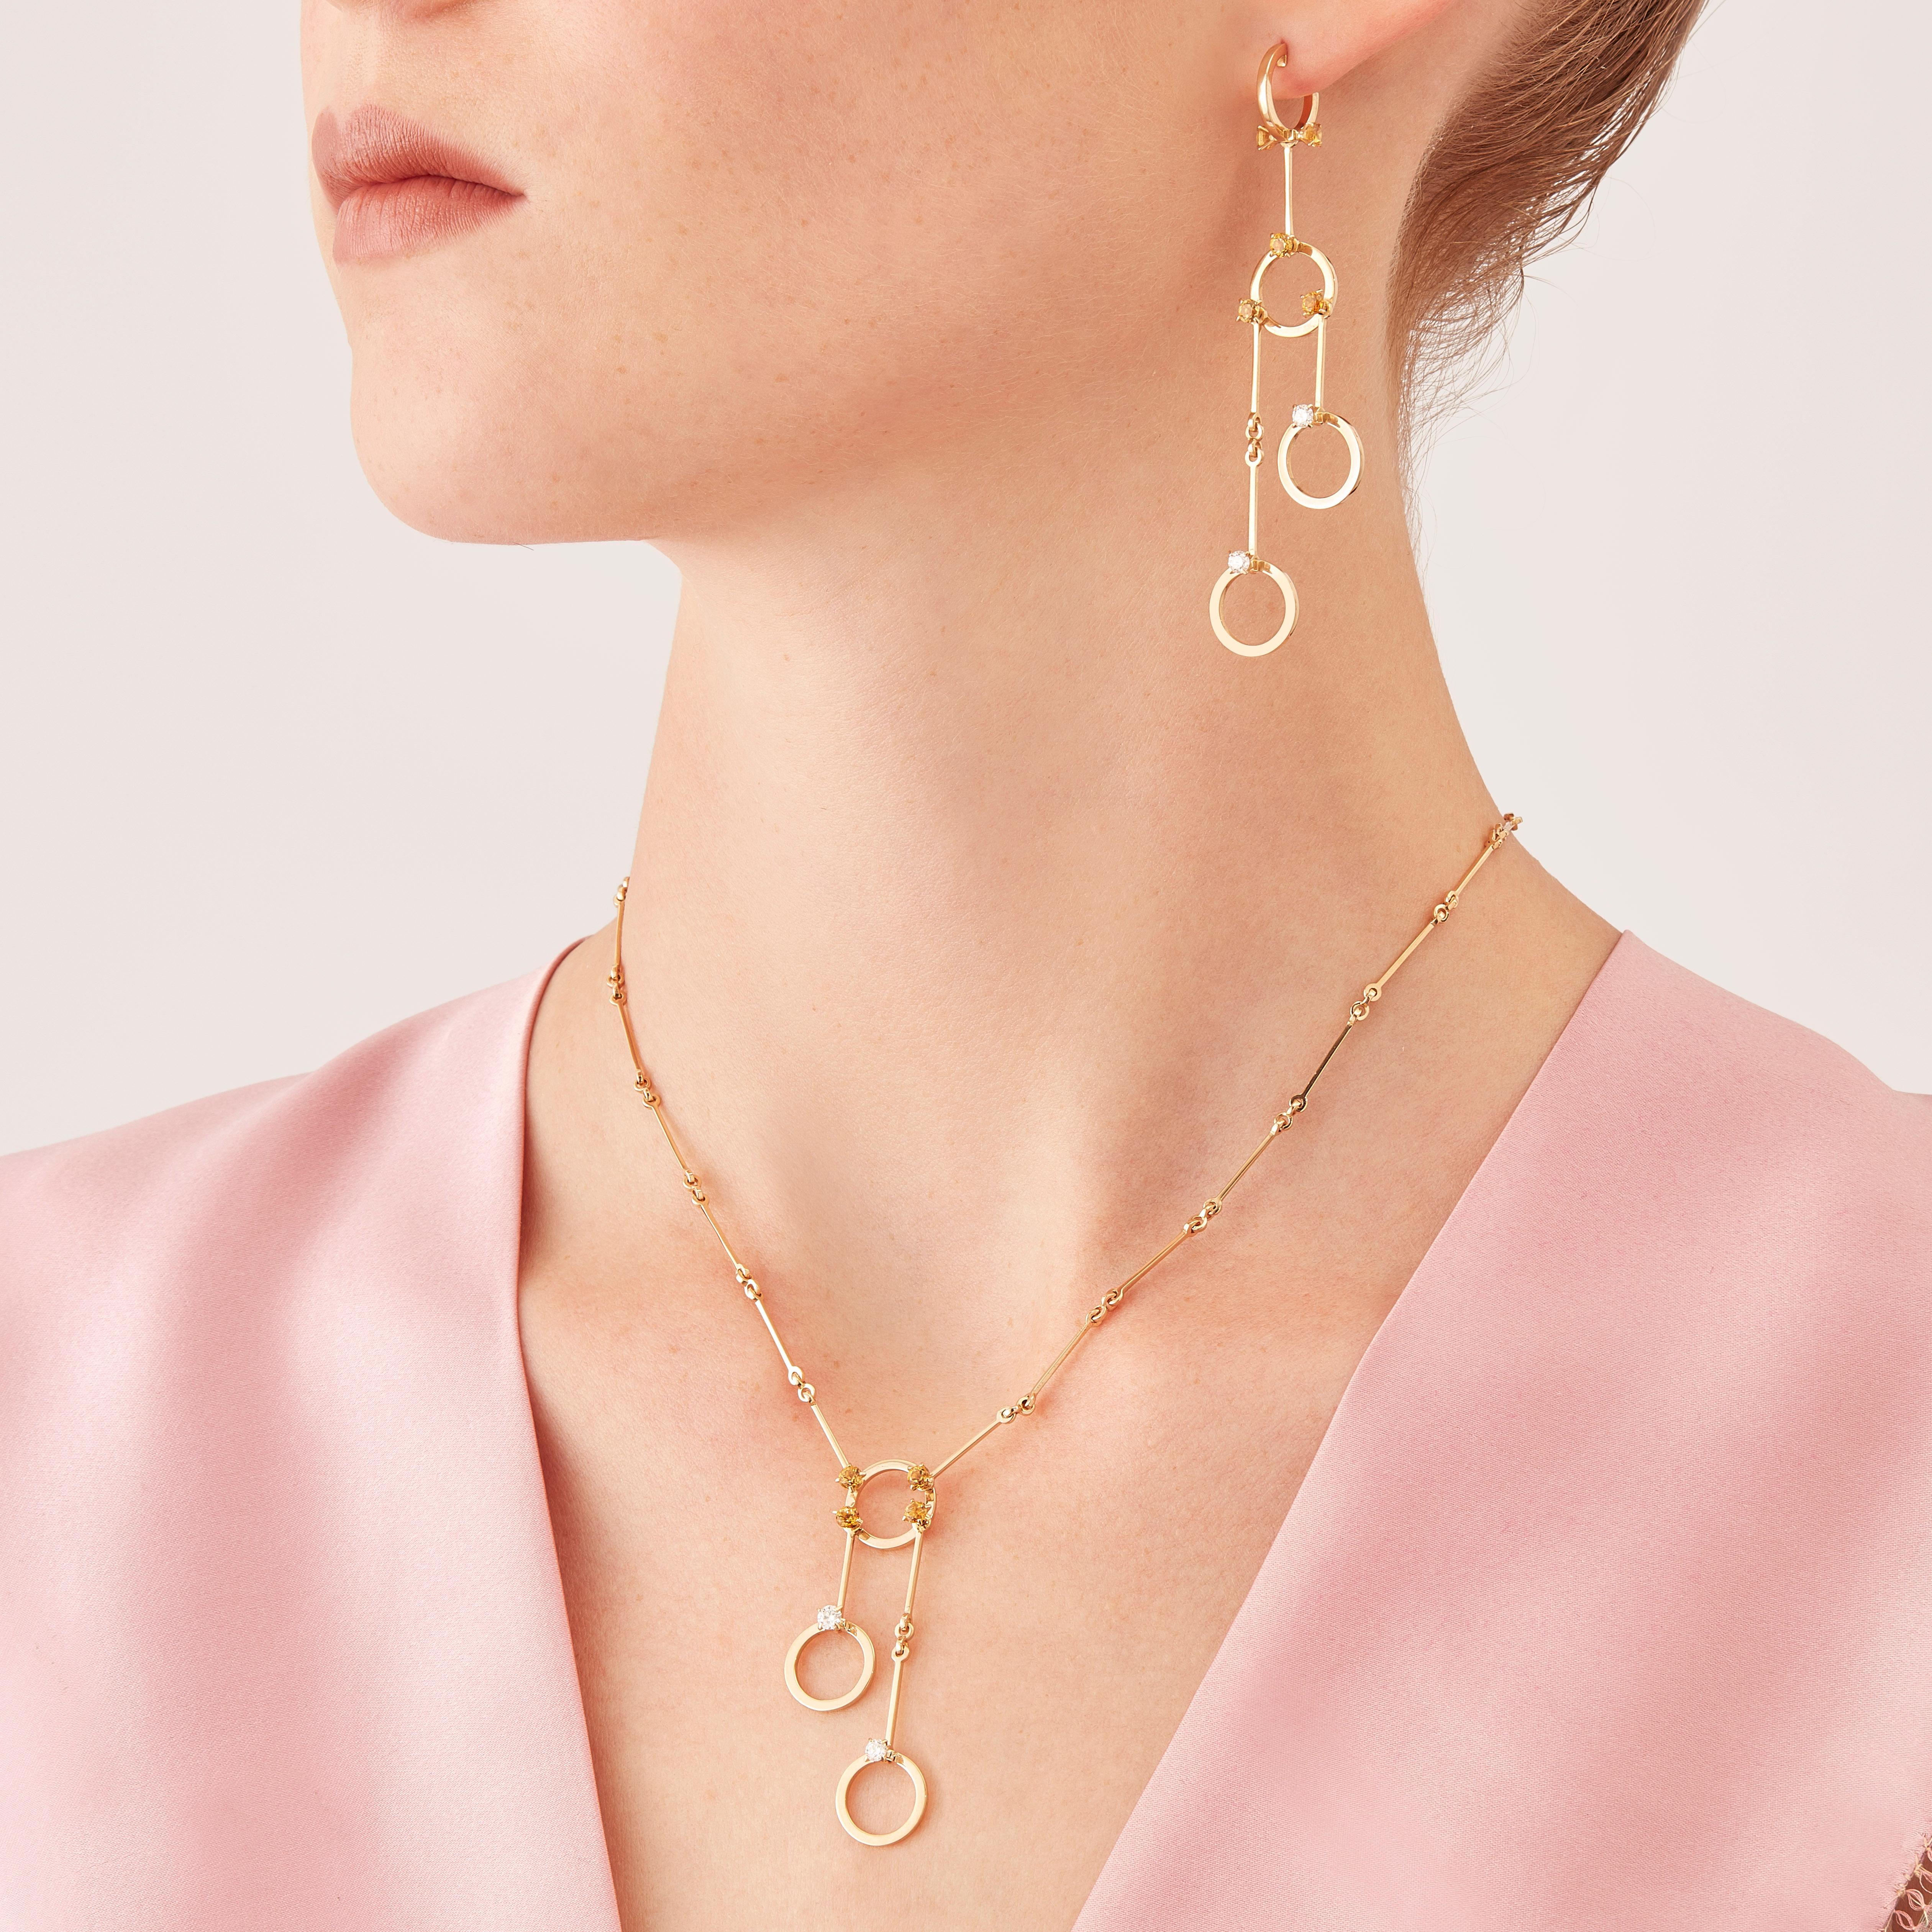 Made by hand in the Milanese atelier of Nathalie Jean, the limited edition Hoi An Small Necklace is a graceful composition of articulated rings and bars in rosé gold, a warm, sophisticated color close to yellow gold. Miniature articulations are